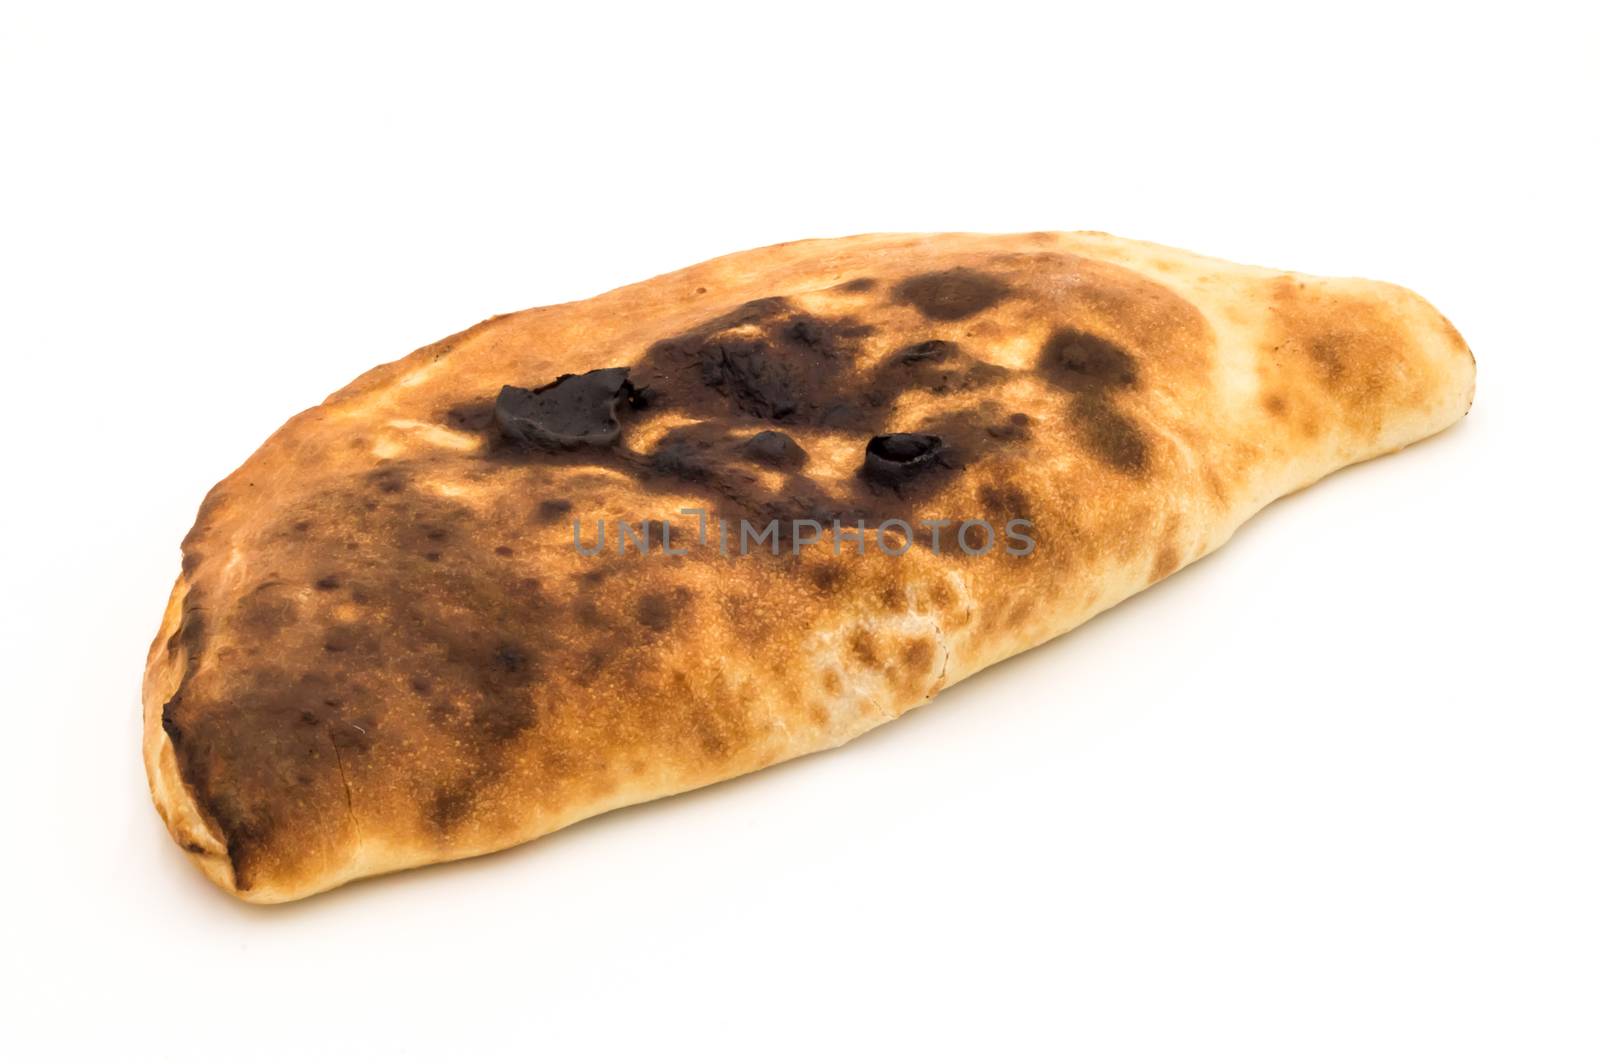 Baked in calzone - closed type of pizza which is folded in half on a white background